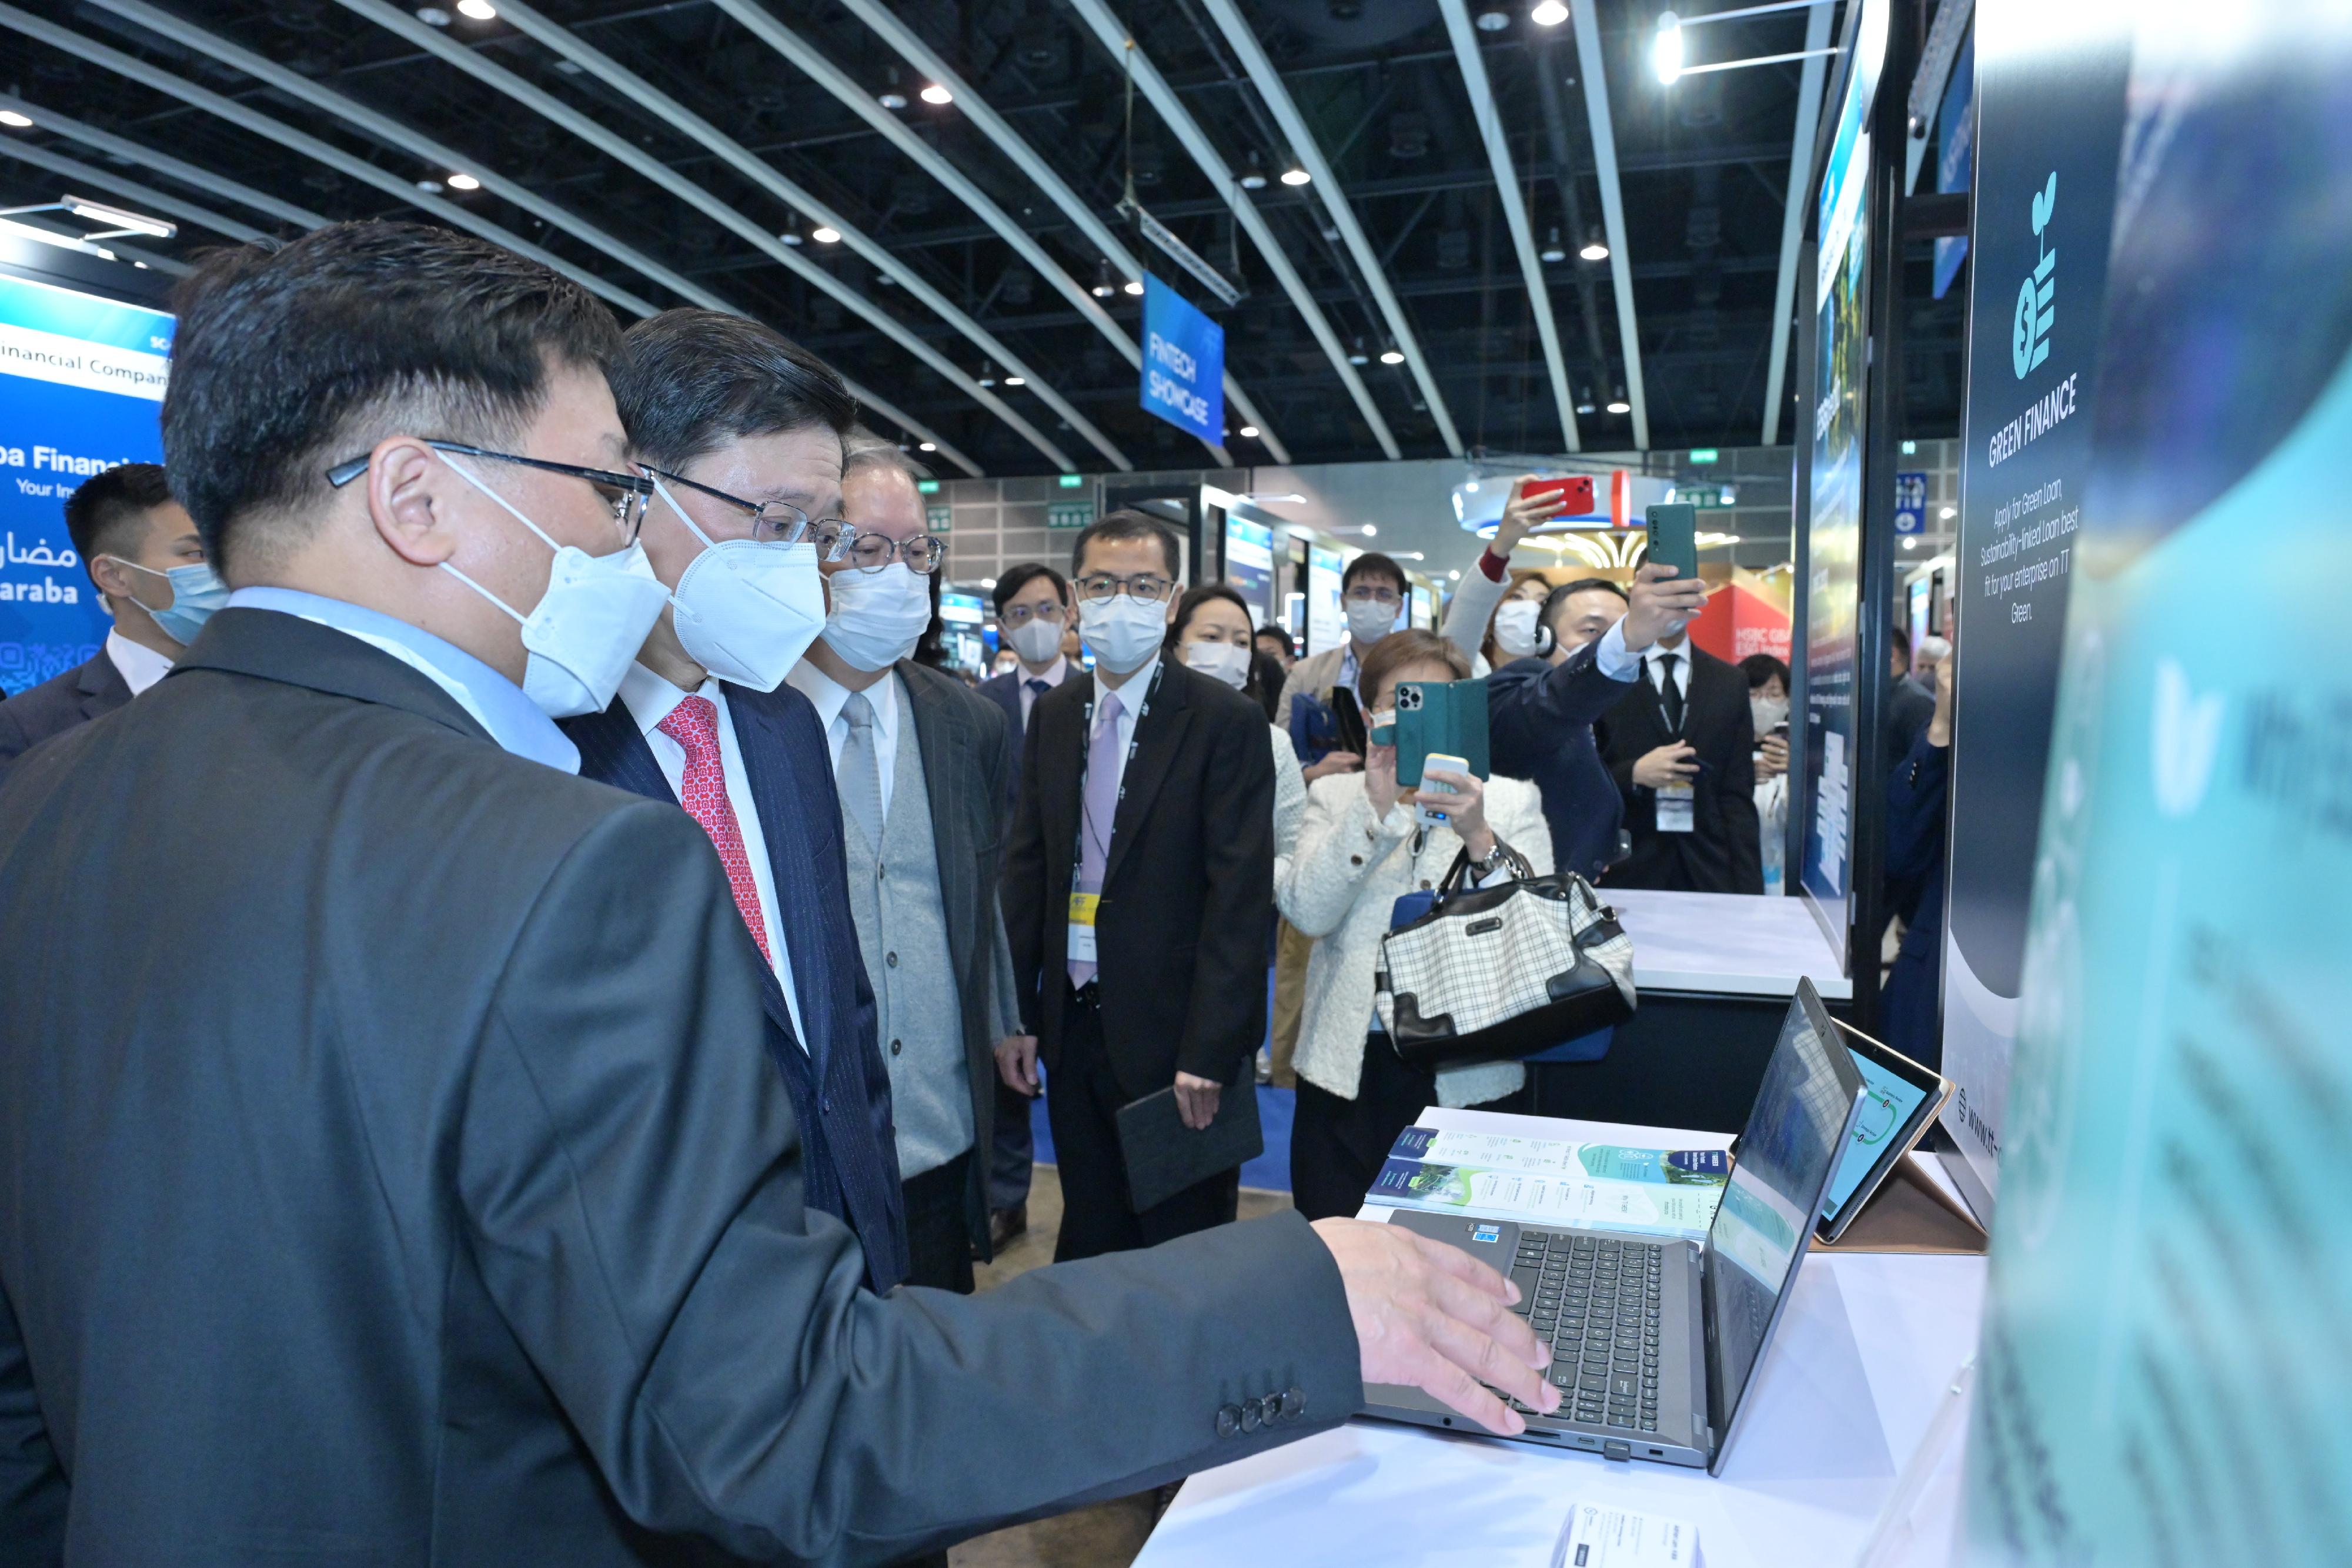 The Chief Executive, Mr John Lee, attended the Asian Financial Forum at the Hong Kong Convention and Exhibition Centre this morning (January 11). Photo shows Mr Lee (second left), visiting the exhibition booths.